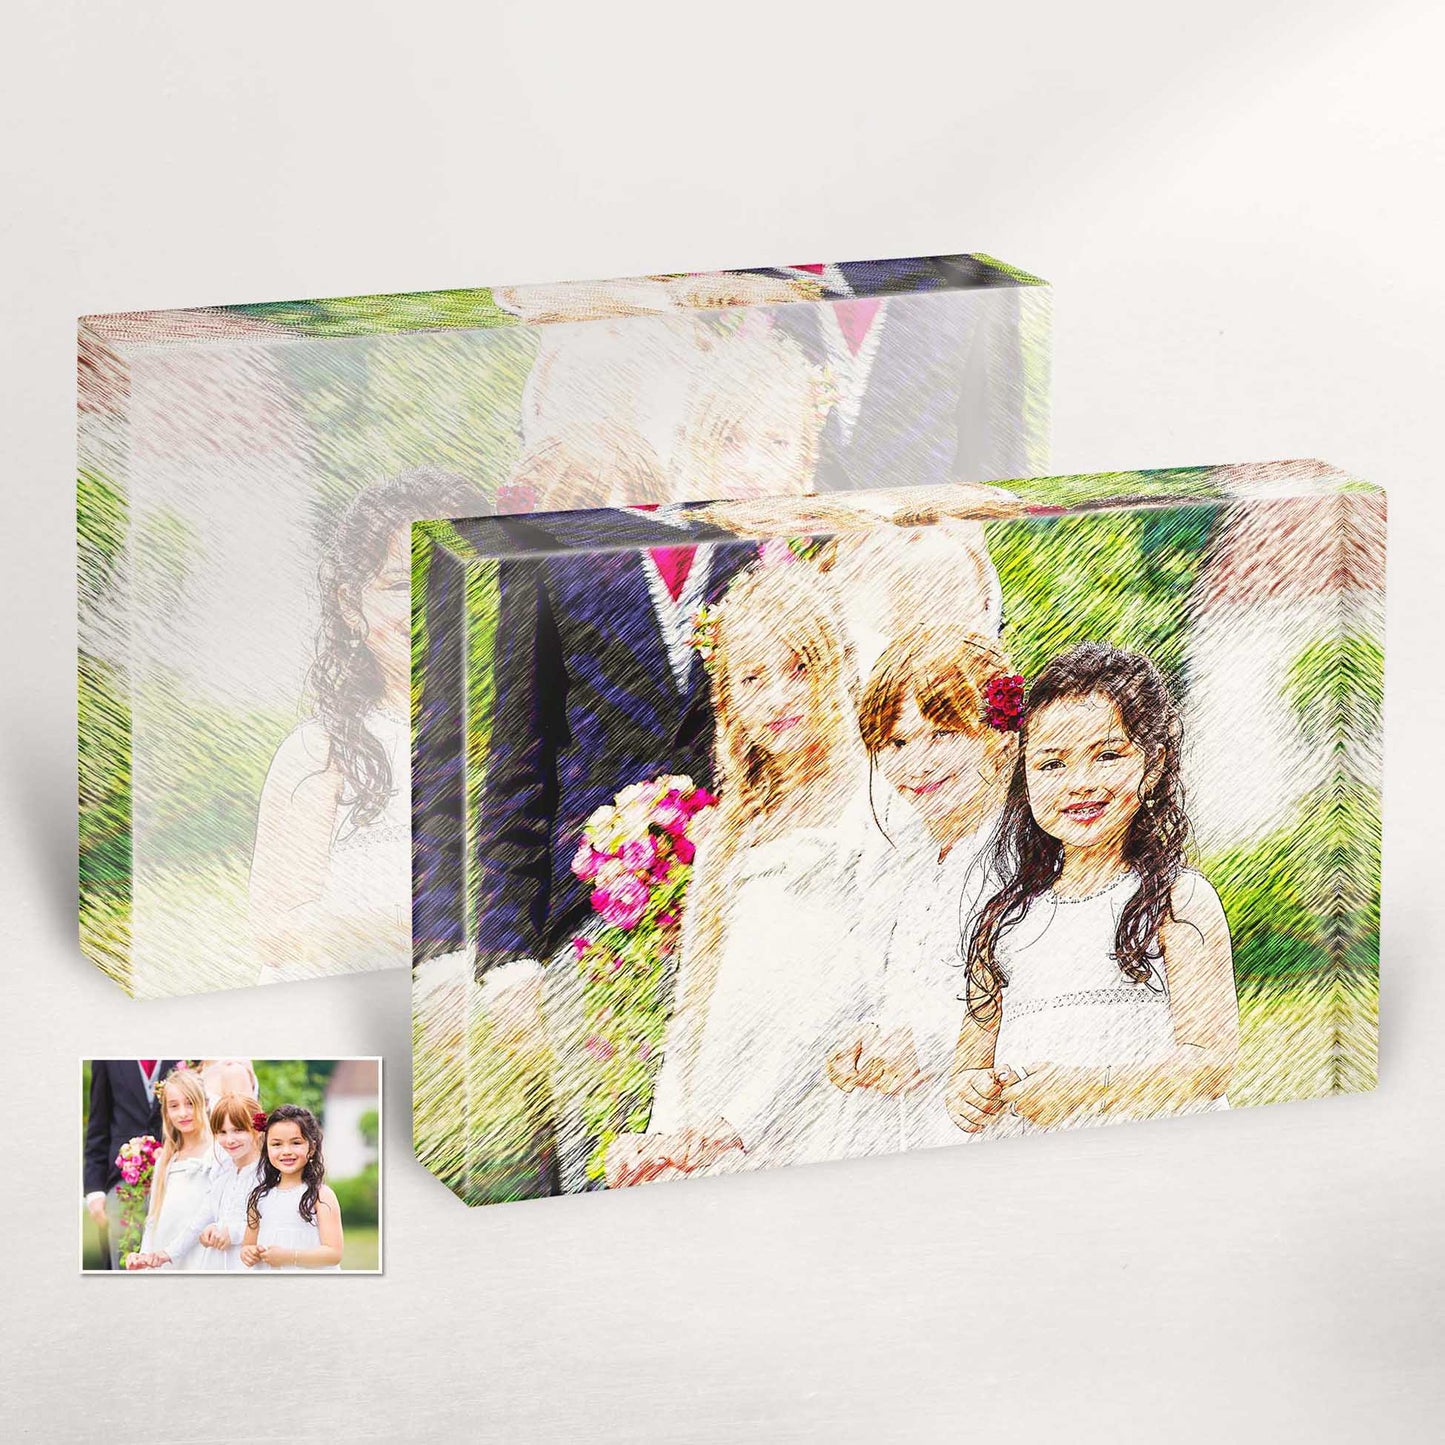 Personalized Artsy Illustration Acrylic Block Photo: Infuse your home decor with original and cool vibes. Our artsy illustrations, created uniquely for you, serve as an inspirational reminder of cherished moments